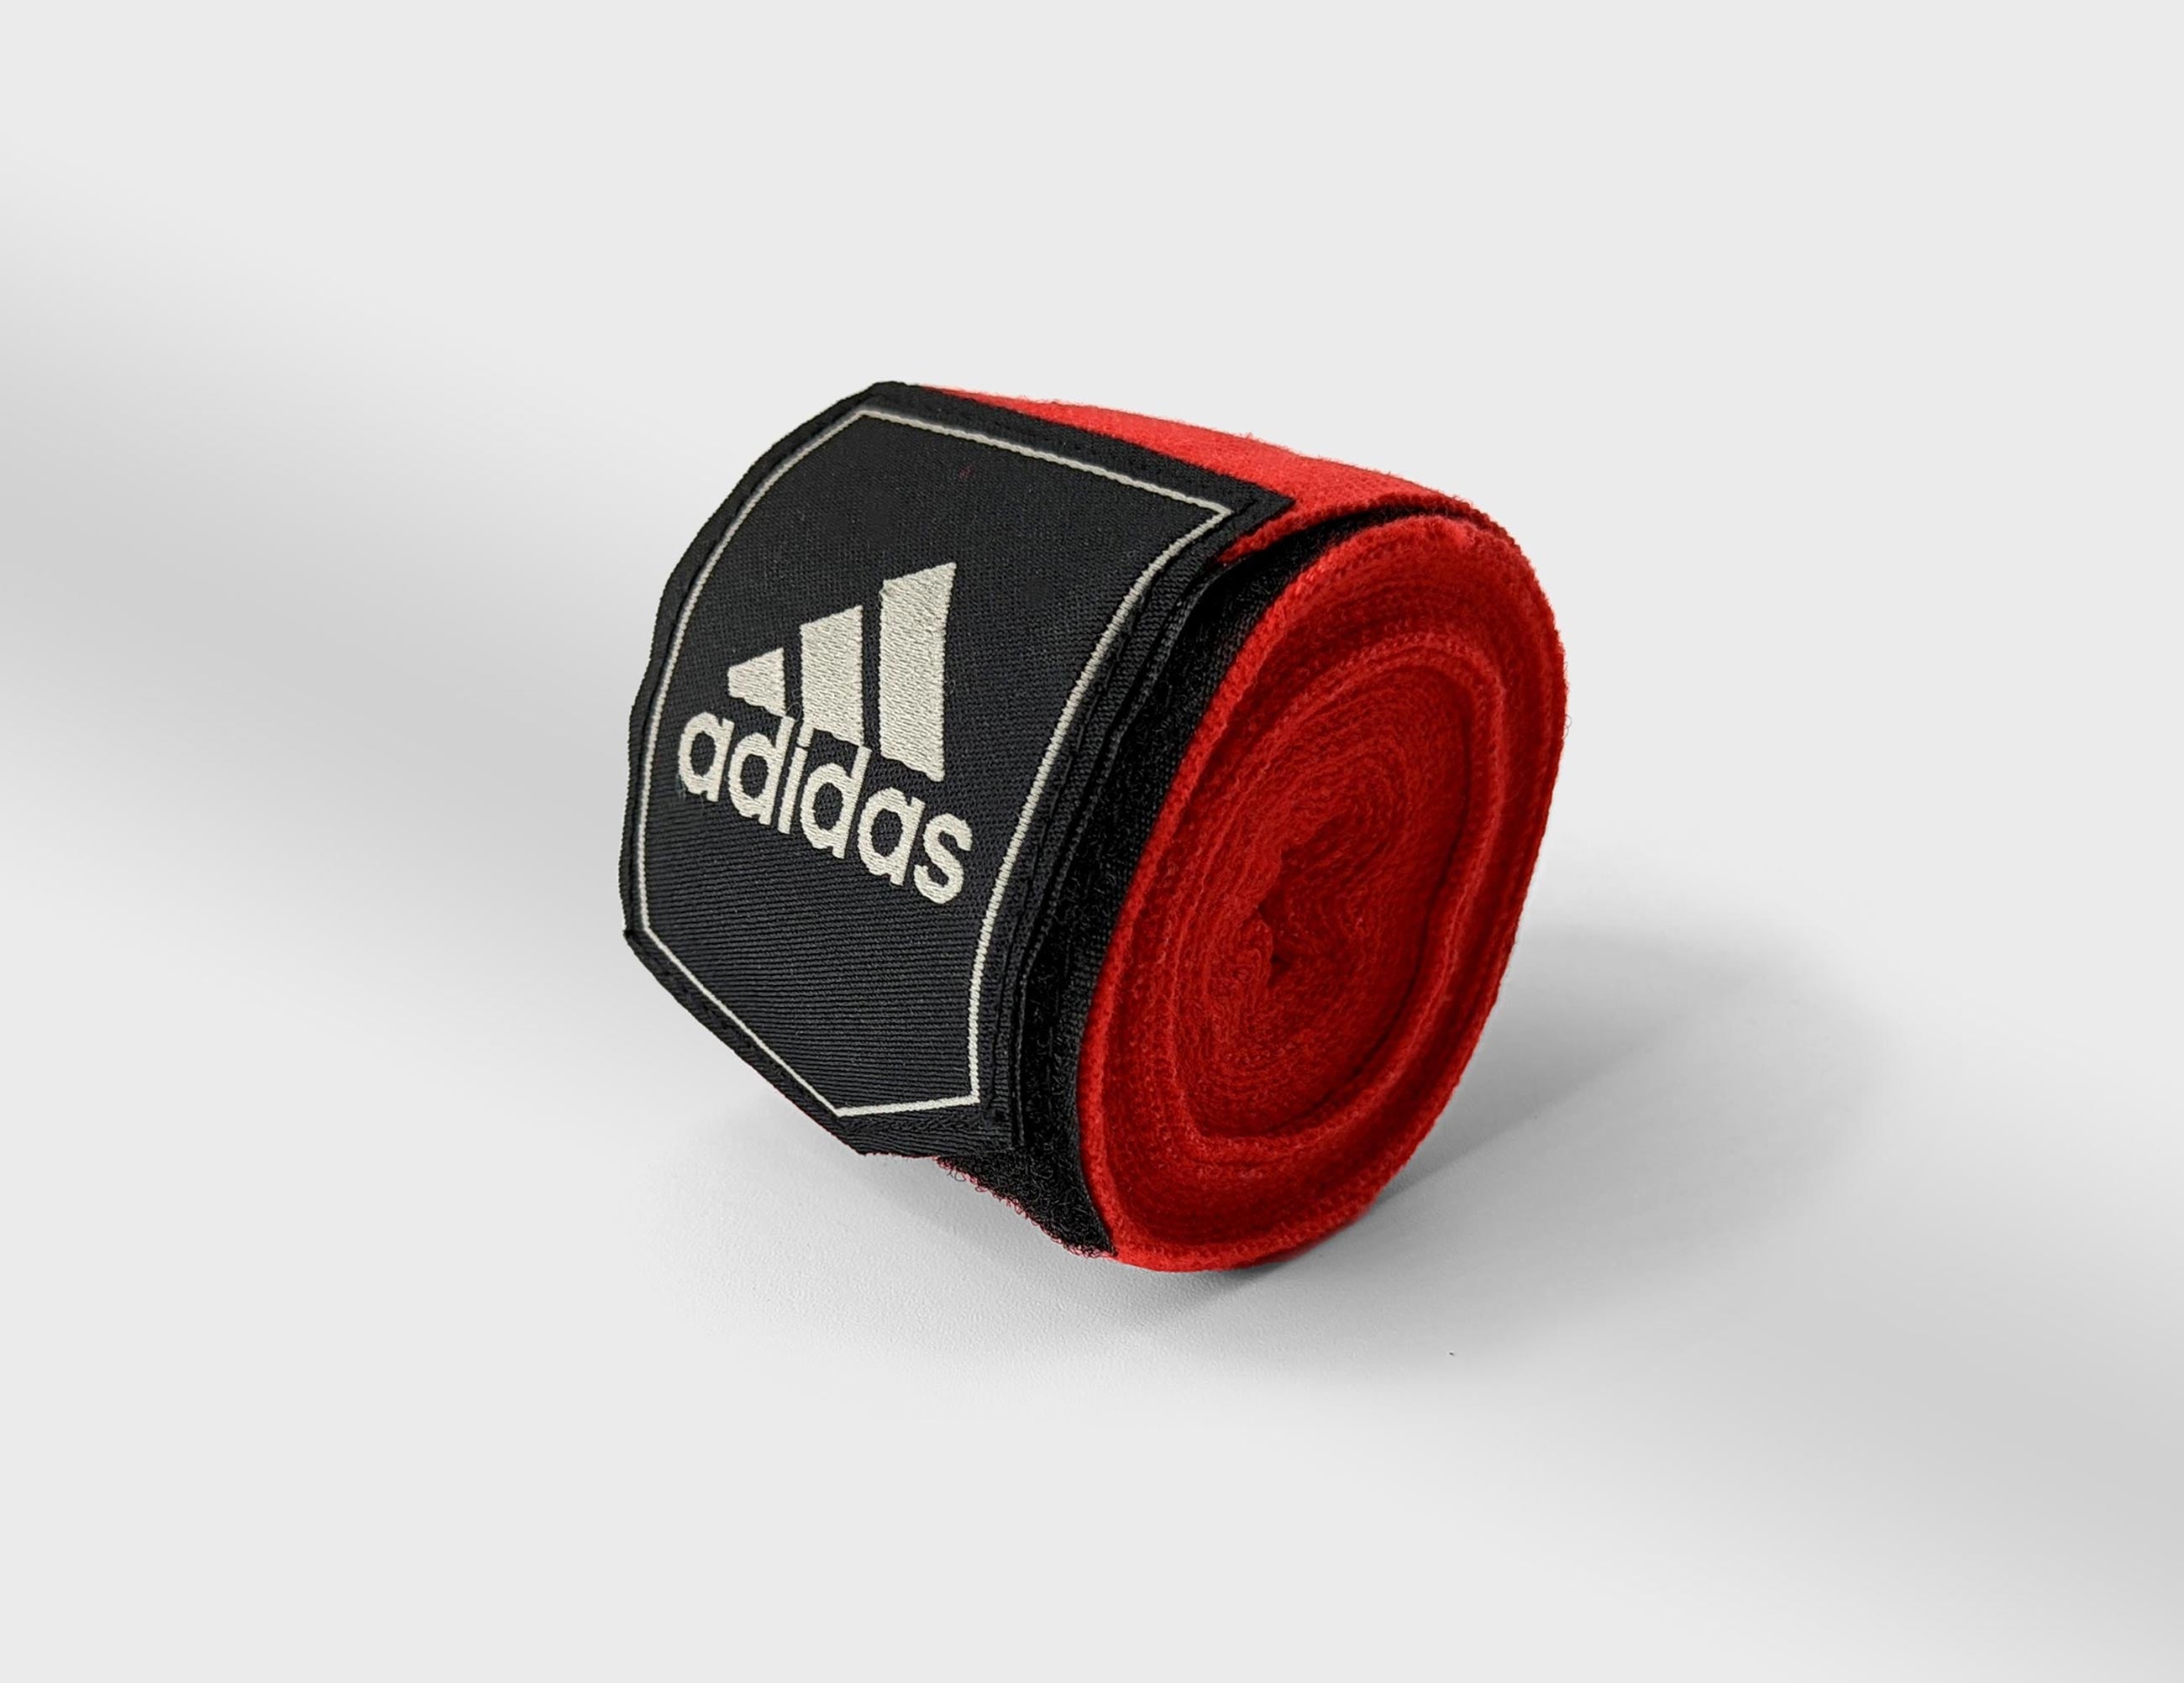 Product image of Adidas Hand Wraps available at ATL Fight Shop. Shop online or in-store at our Roswell, GA location.